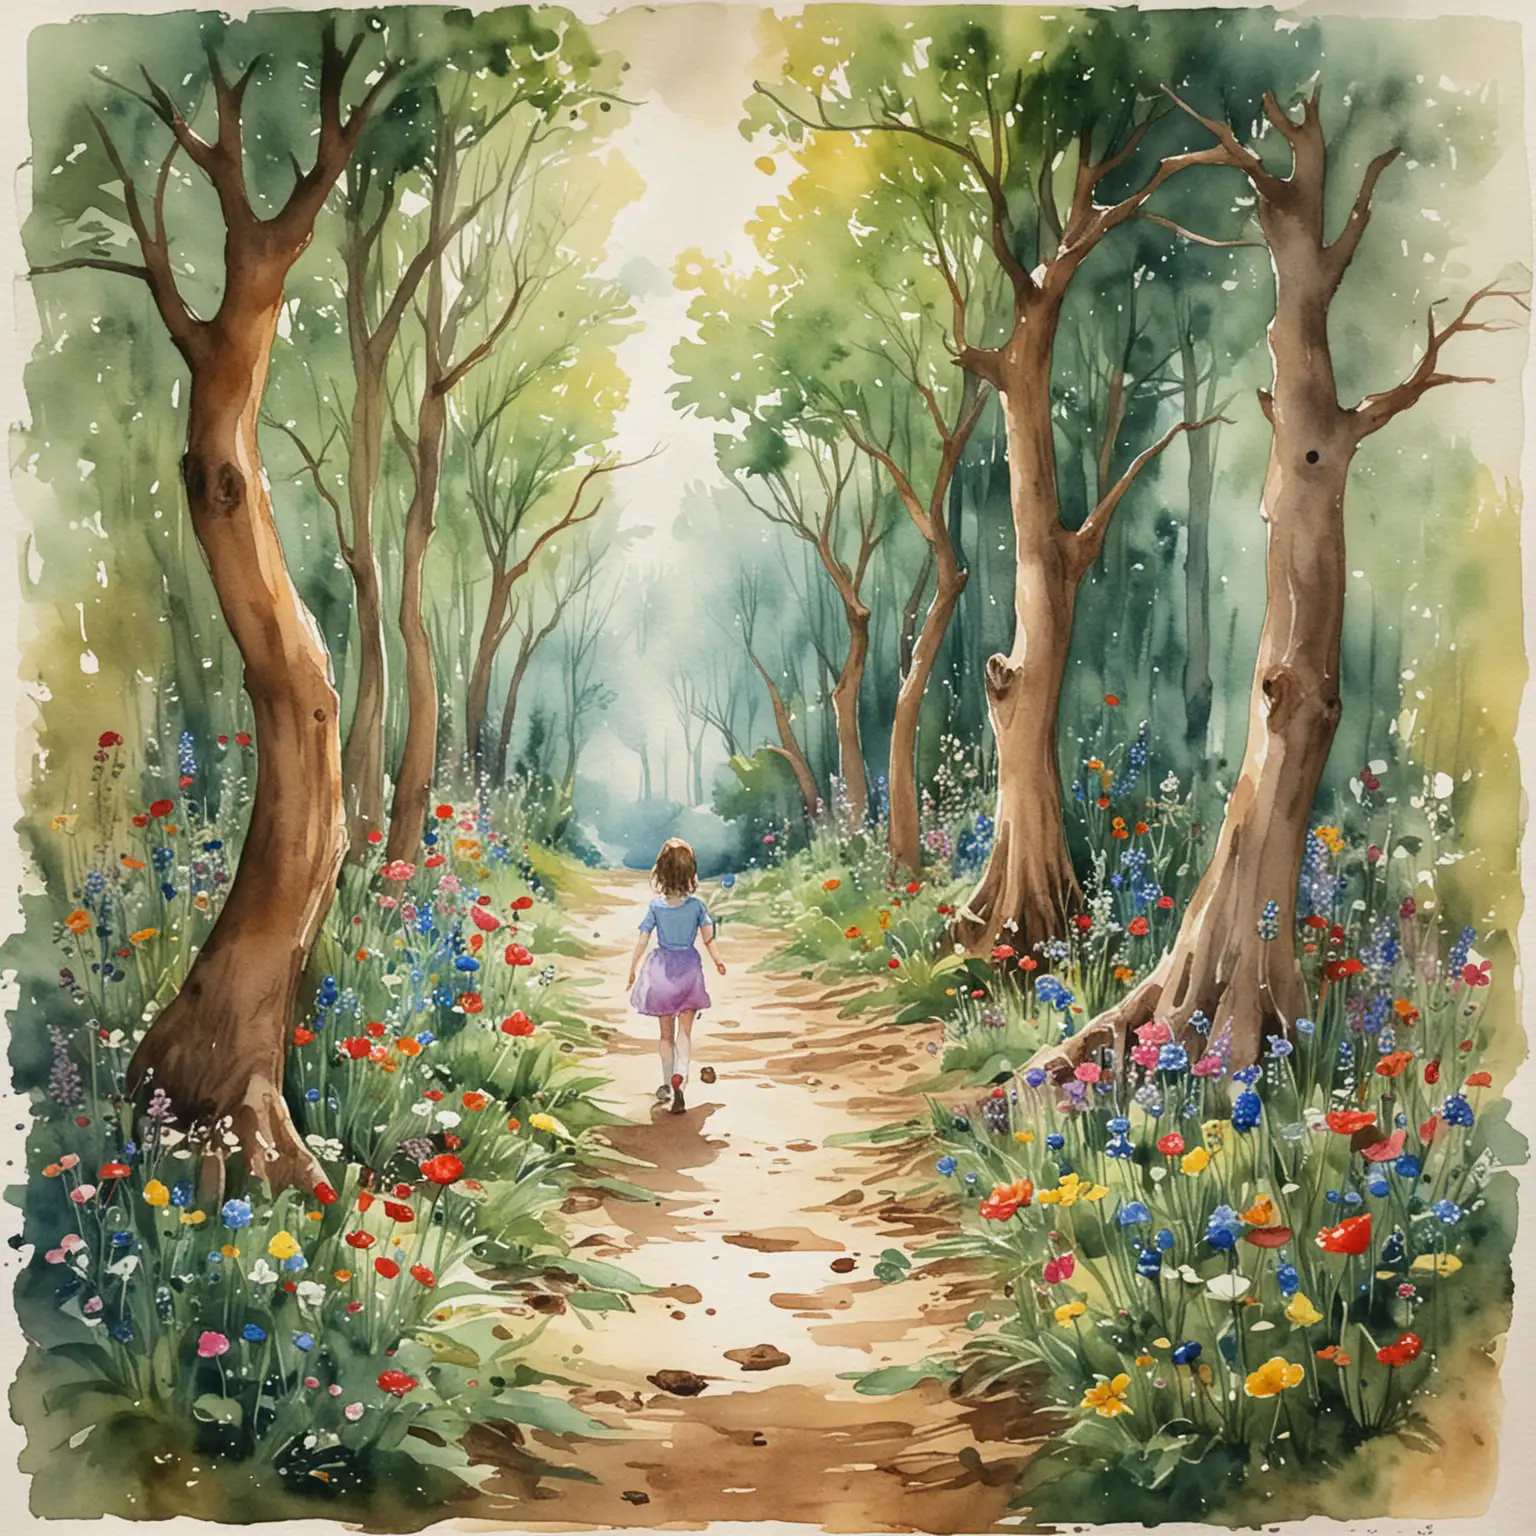 Whimsical Watercolor Illustration of Alice in Wonderland